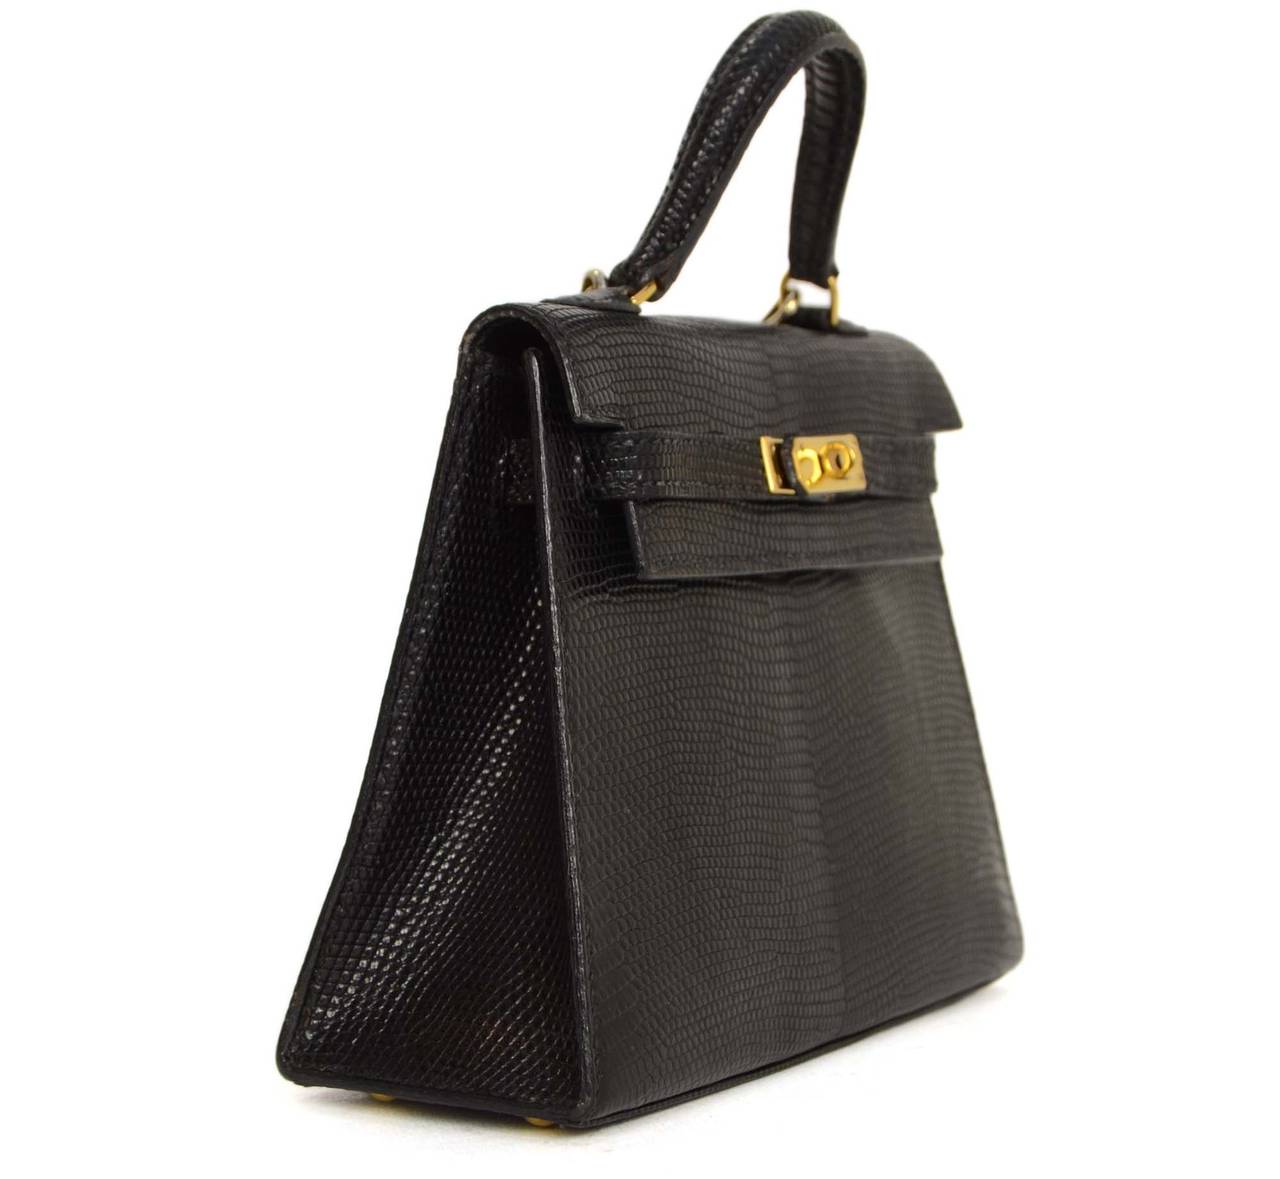 Hermes Vintage '92 Black Lizard Skin 15cm Kelly Bag
Made in: France
Year of Production: 1992
Color: Black
Hardware: Gold-plated
Materials: Lizard skin
Lining: Black leather
Closure/opening: Top flap with two leather arms and center turn